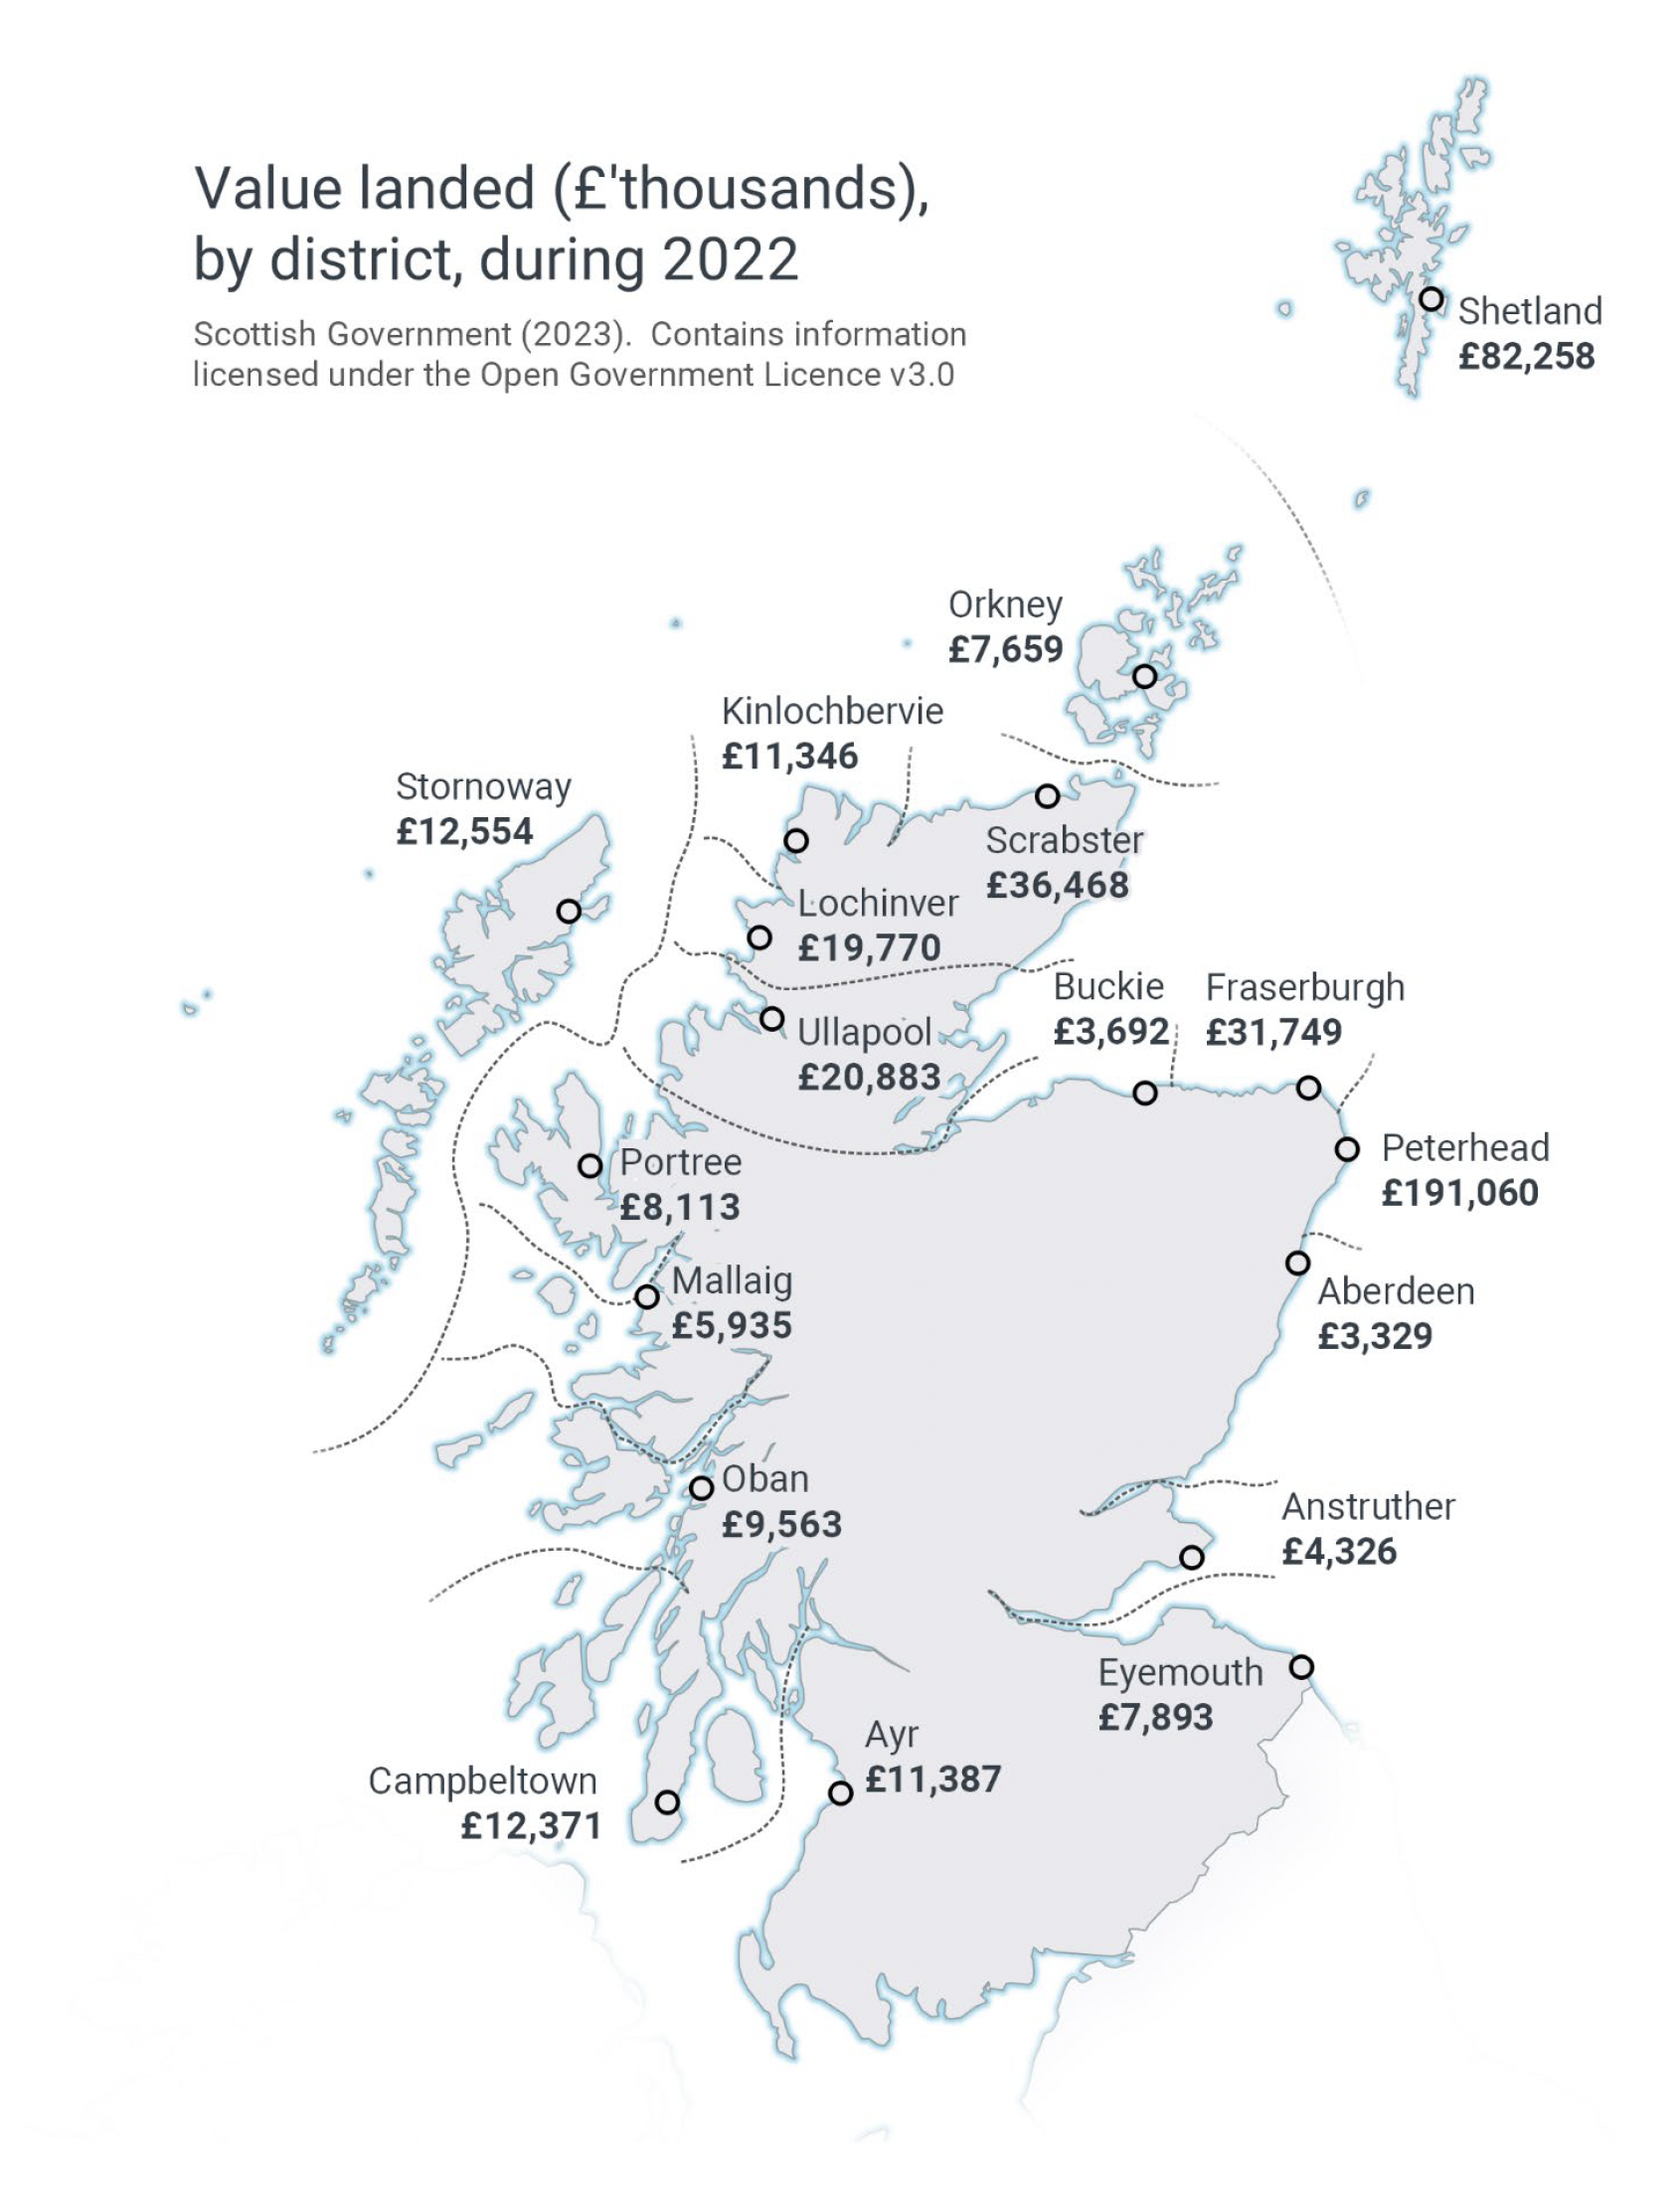 A map showing the value of fish landed into Scotland by all vessels by district in 2022. The map shows that the district with the highest value of fish landed into was Peterhead with 191 million pounds worth landed.  